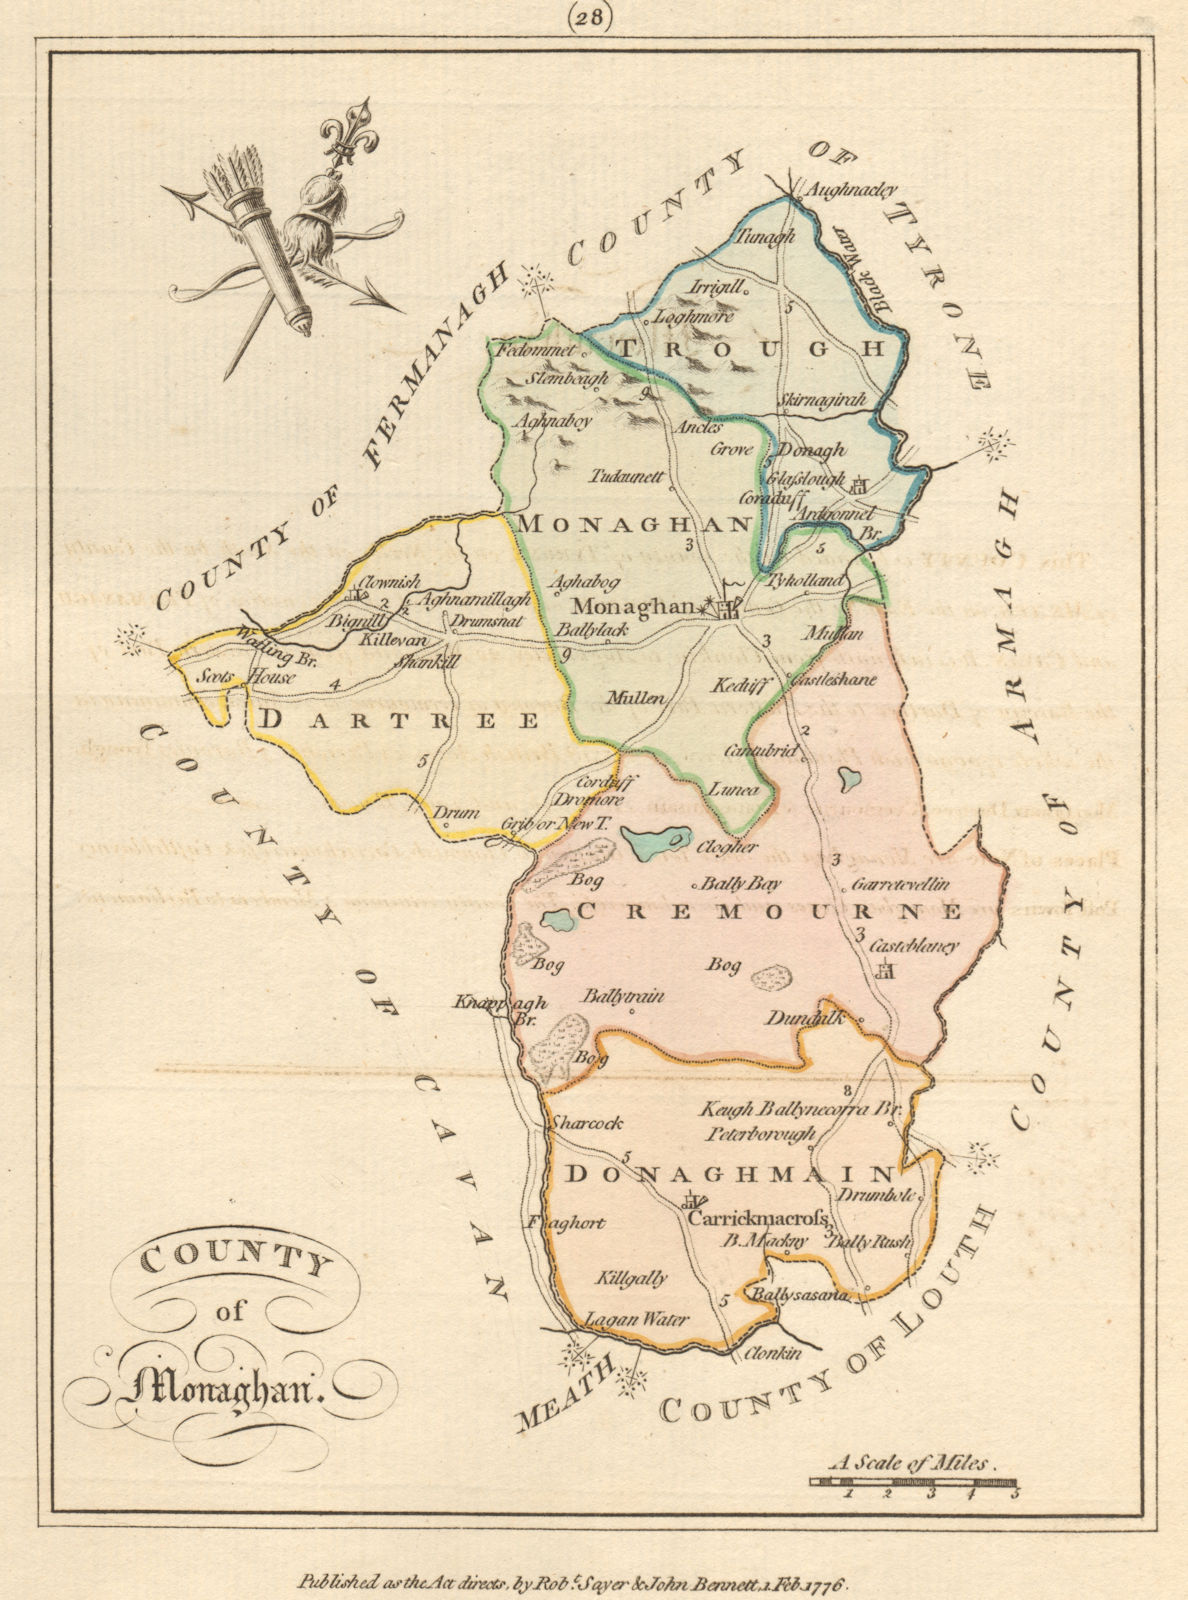 County of Monaghan, Ulster. Antique copperplate map by Scalé / Sayer 1776